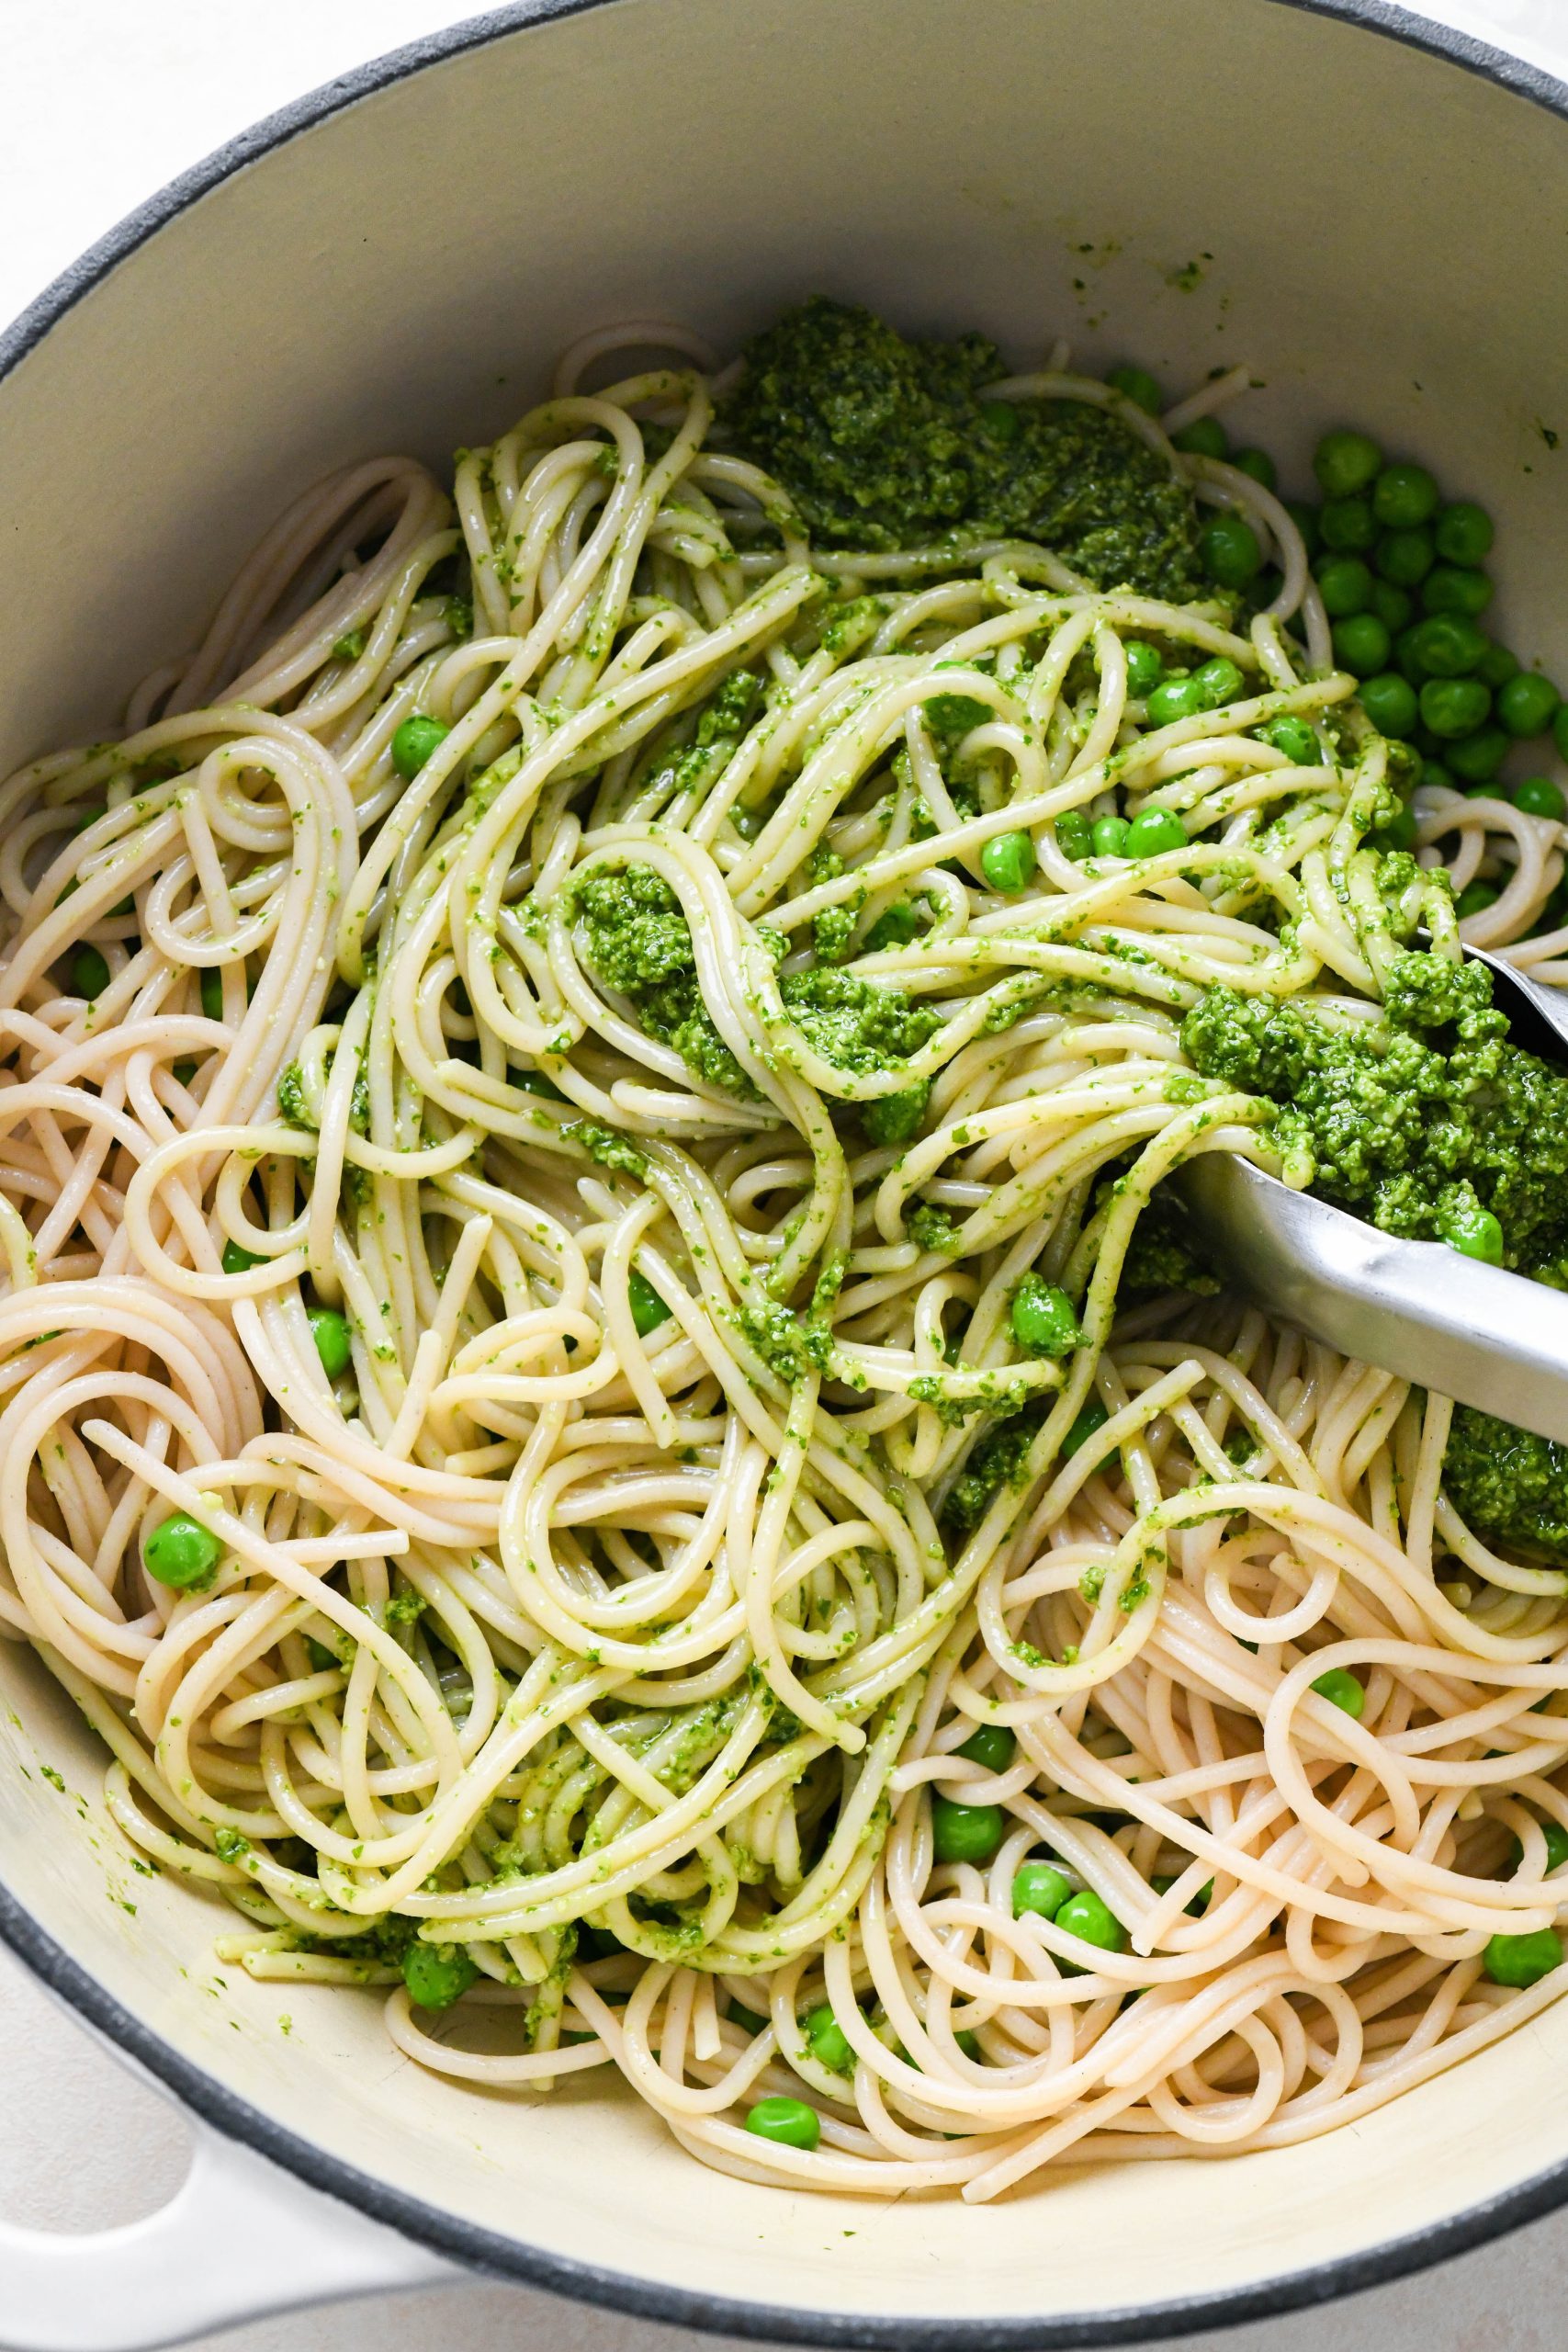 How to make easy pesto pasta: Tossing pasta together with sauce.